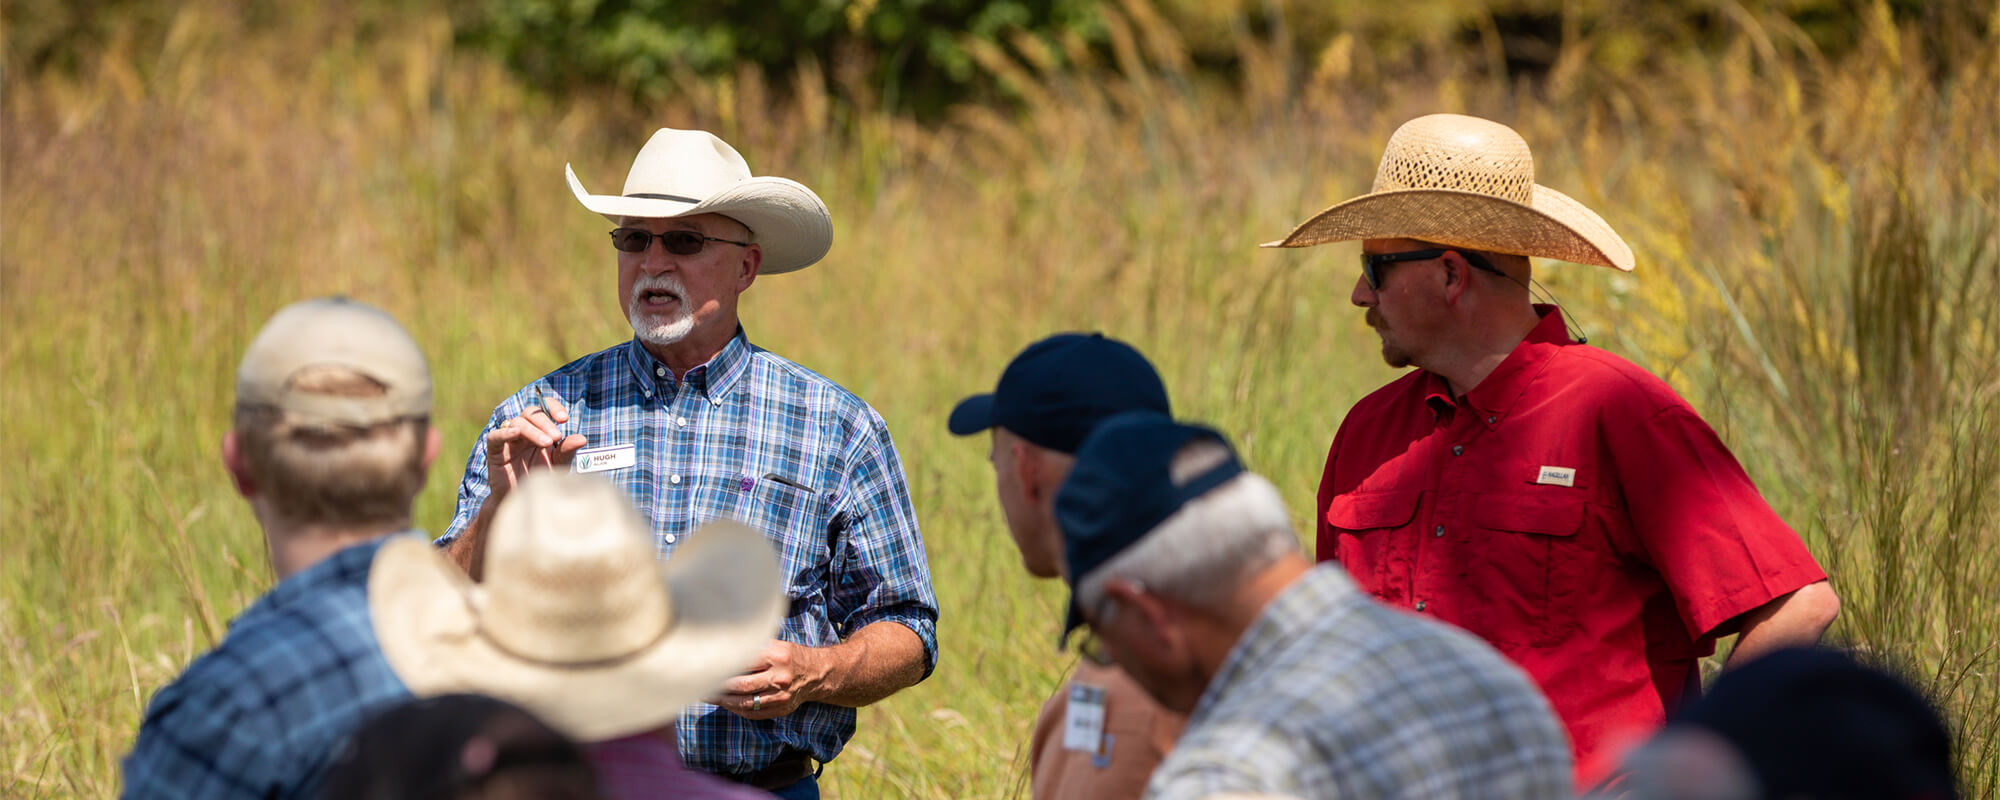 Hugh Aljoe, Noble's Director of Producer Relations, and Joe Pokay, Noble's General Ranch Manager, speak with a rancher group on a tour of Noble Research Institute's Red River Ranch.